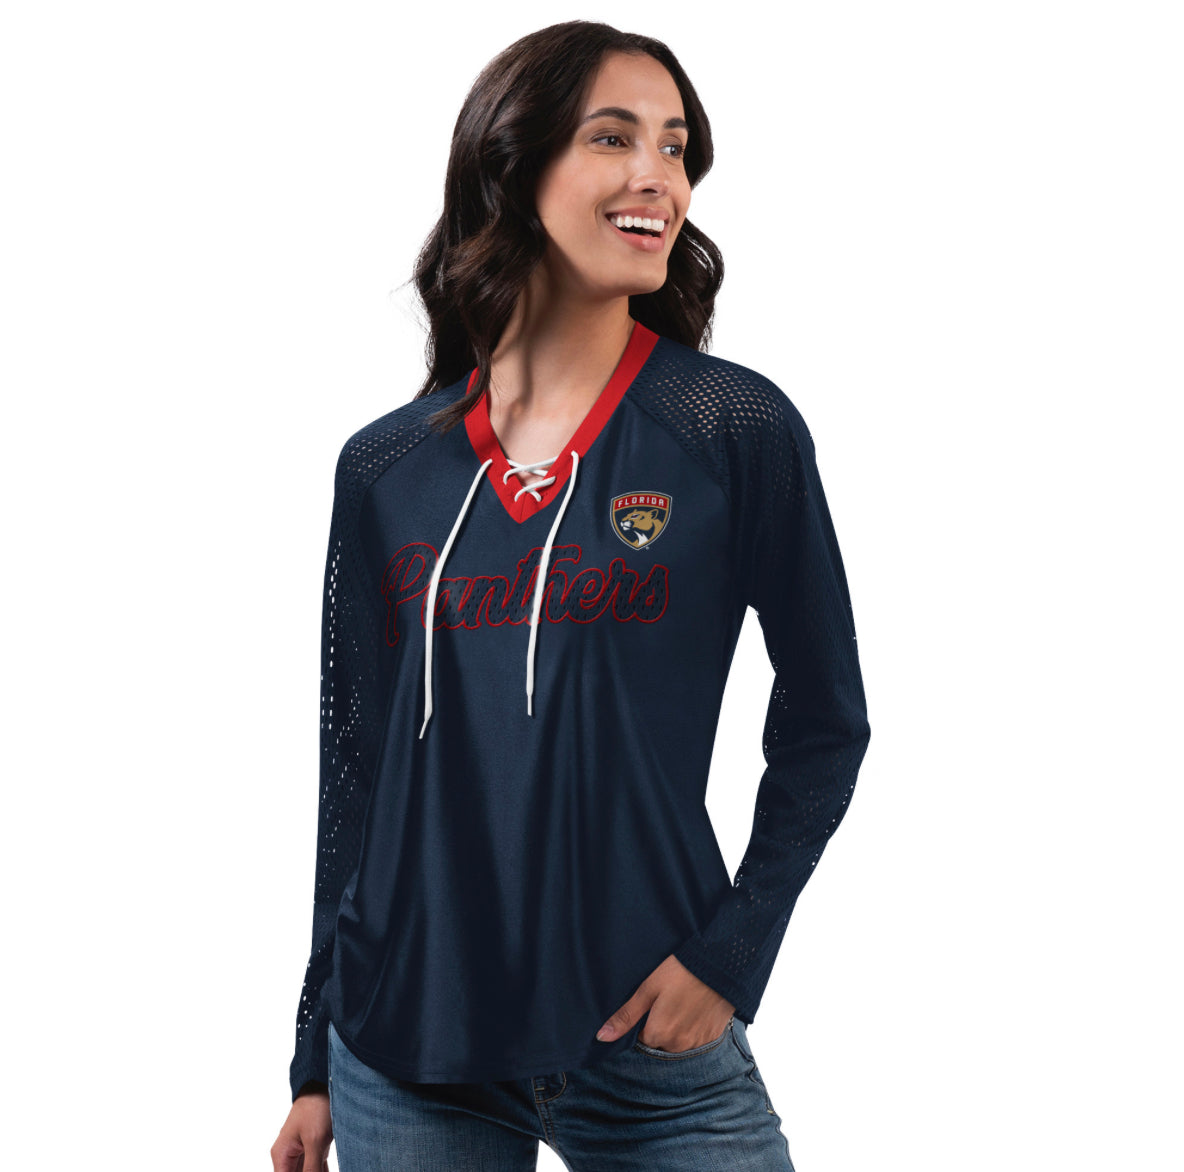 Florida Panthers G-lll 4Her Women's Arquero L/S Mesh Jersey Shirt  - Navy/Red